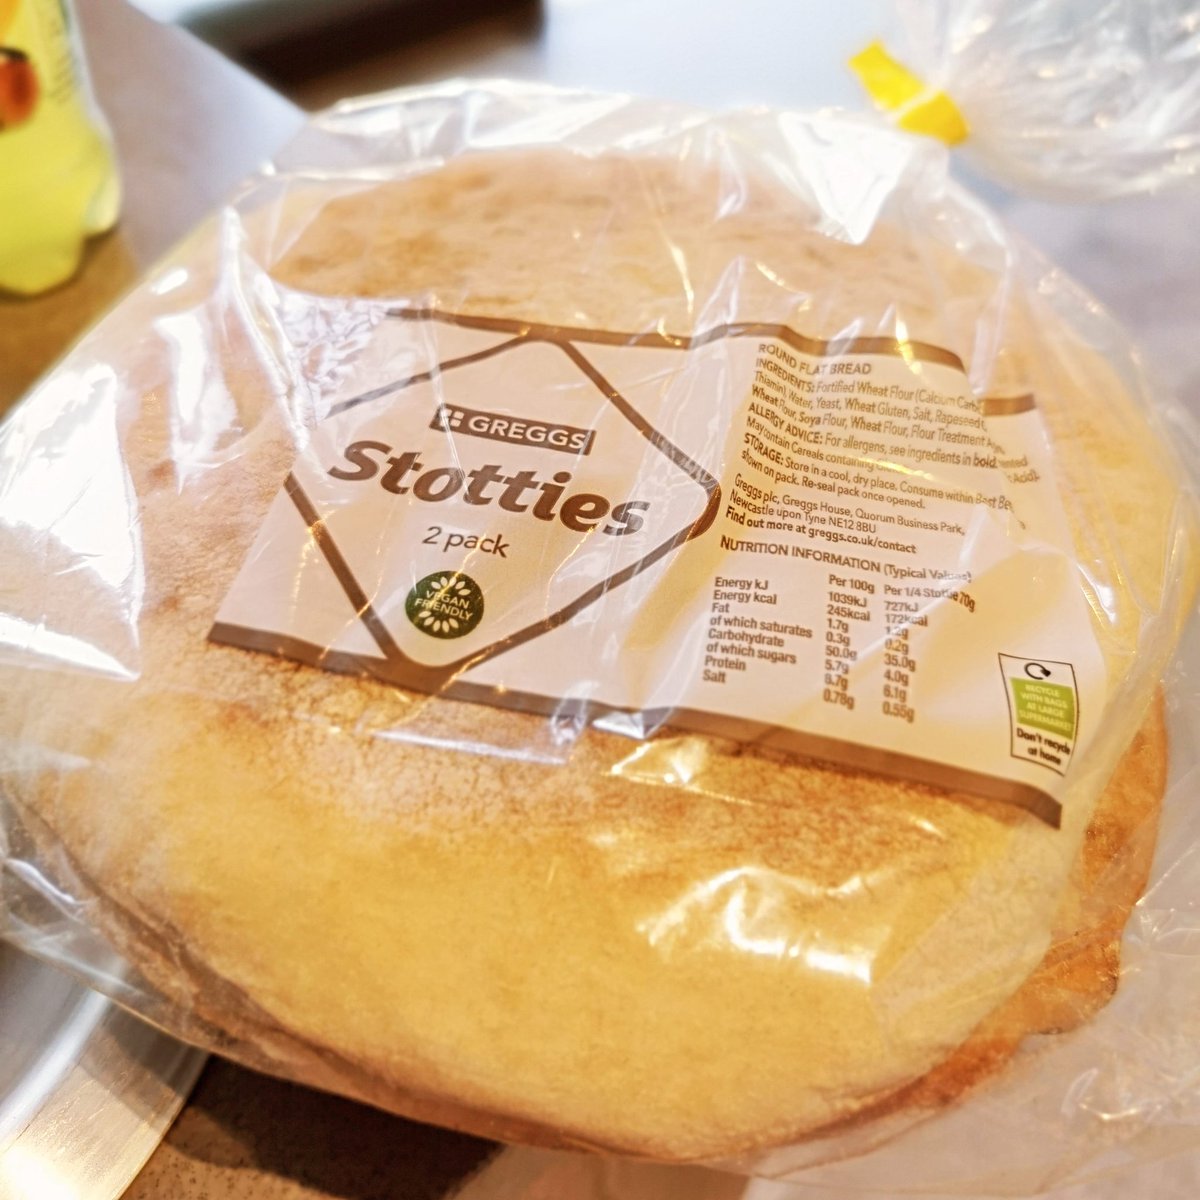 Lunch grab between HMP Deerbolt and HMP Askham Grange for the #WeRoar tour. So I need local food know-how. What do I do with Stotties? #stotties #barnardcastle